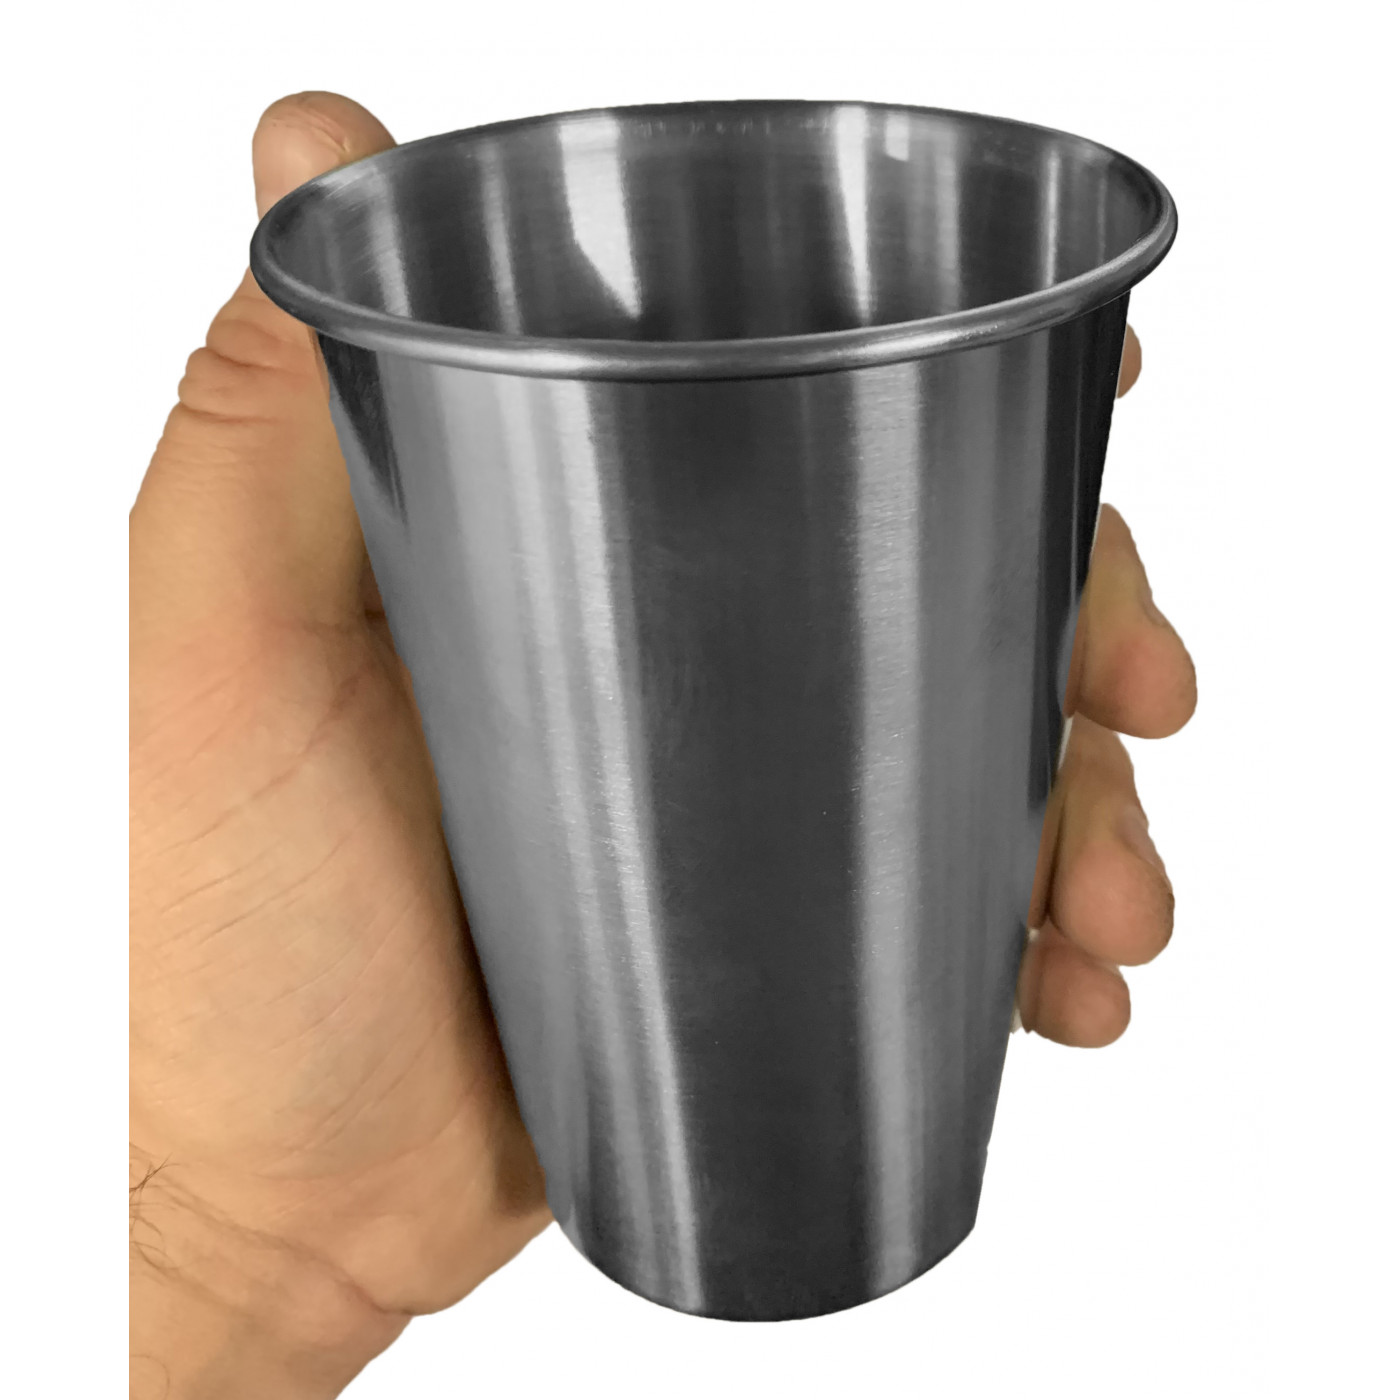 https://www.woodtoolsanddeco.com/8616-large_default/set-of-6-stainless-steel-winecups-500-ml-with-rolled-edge.jpg